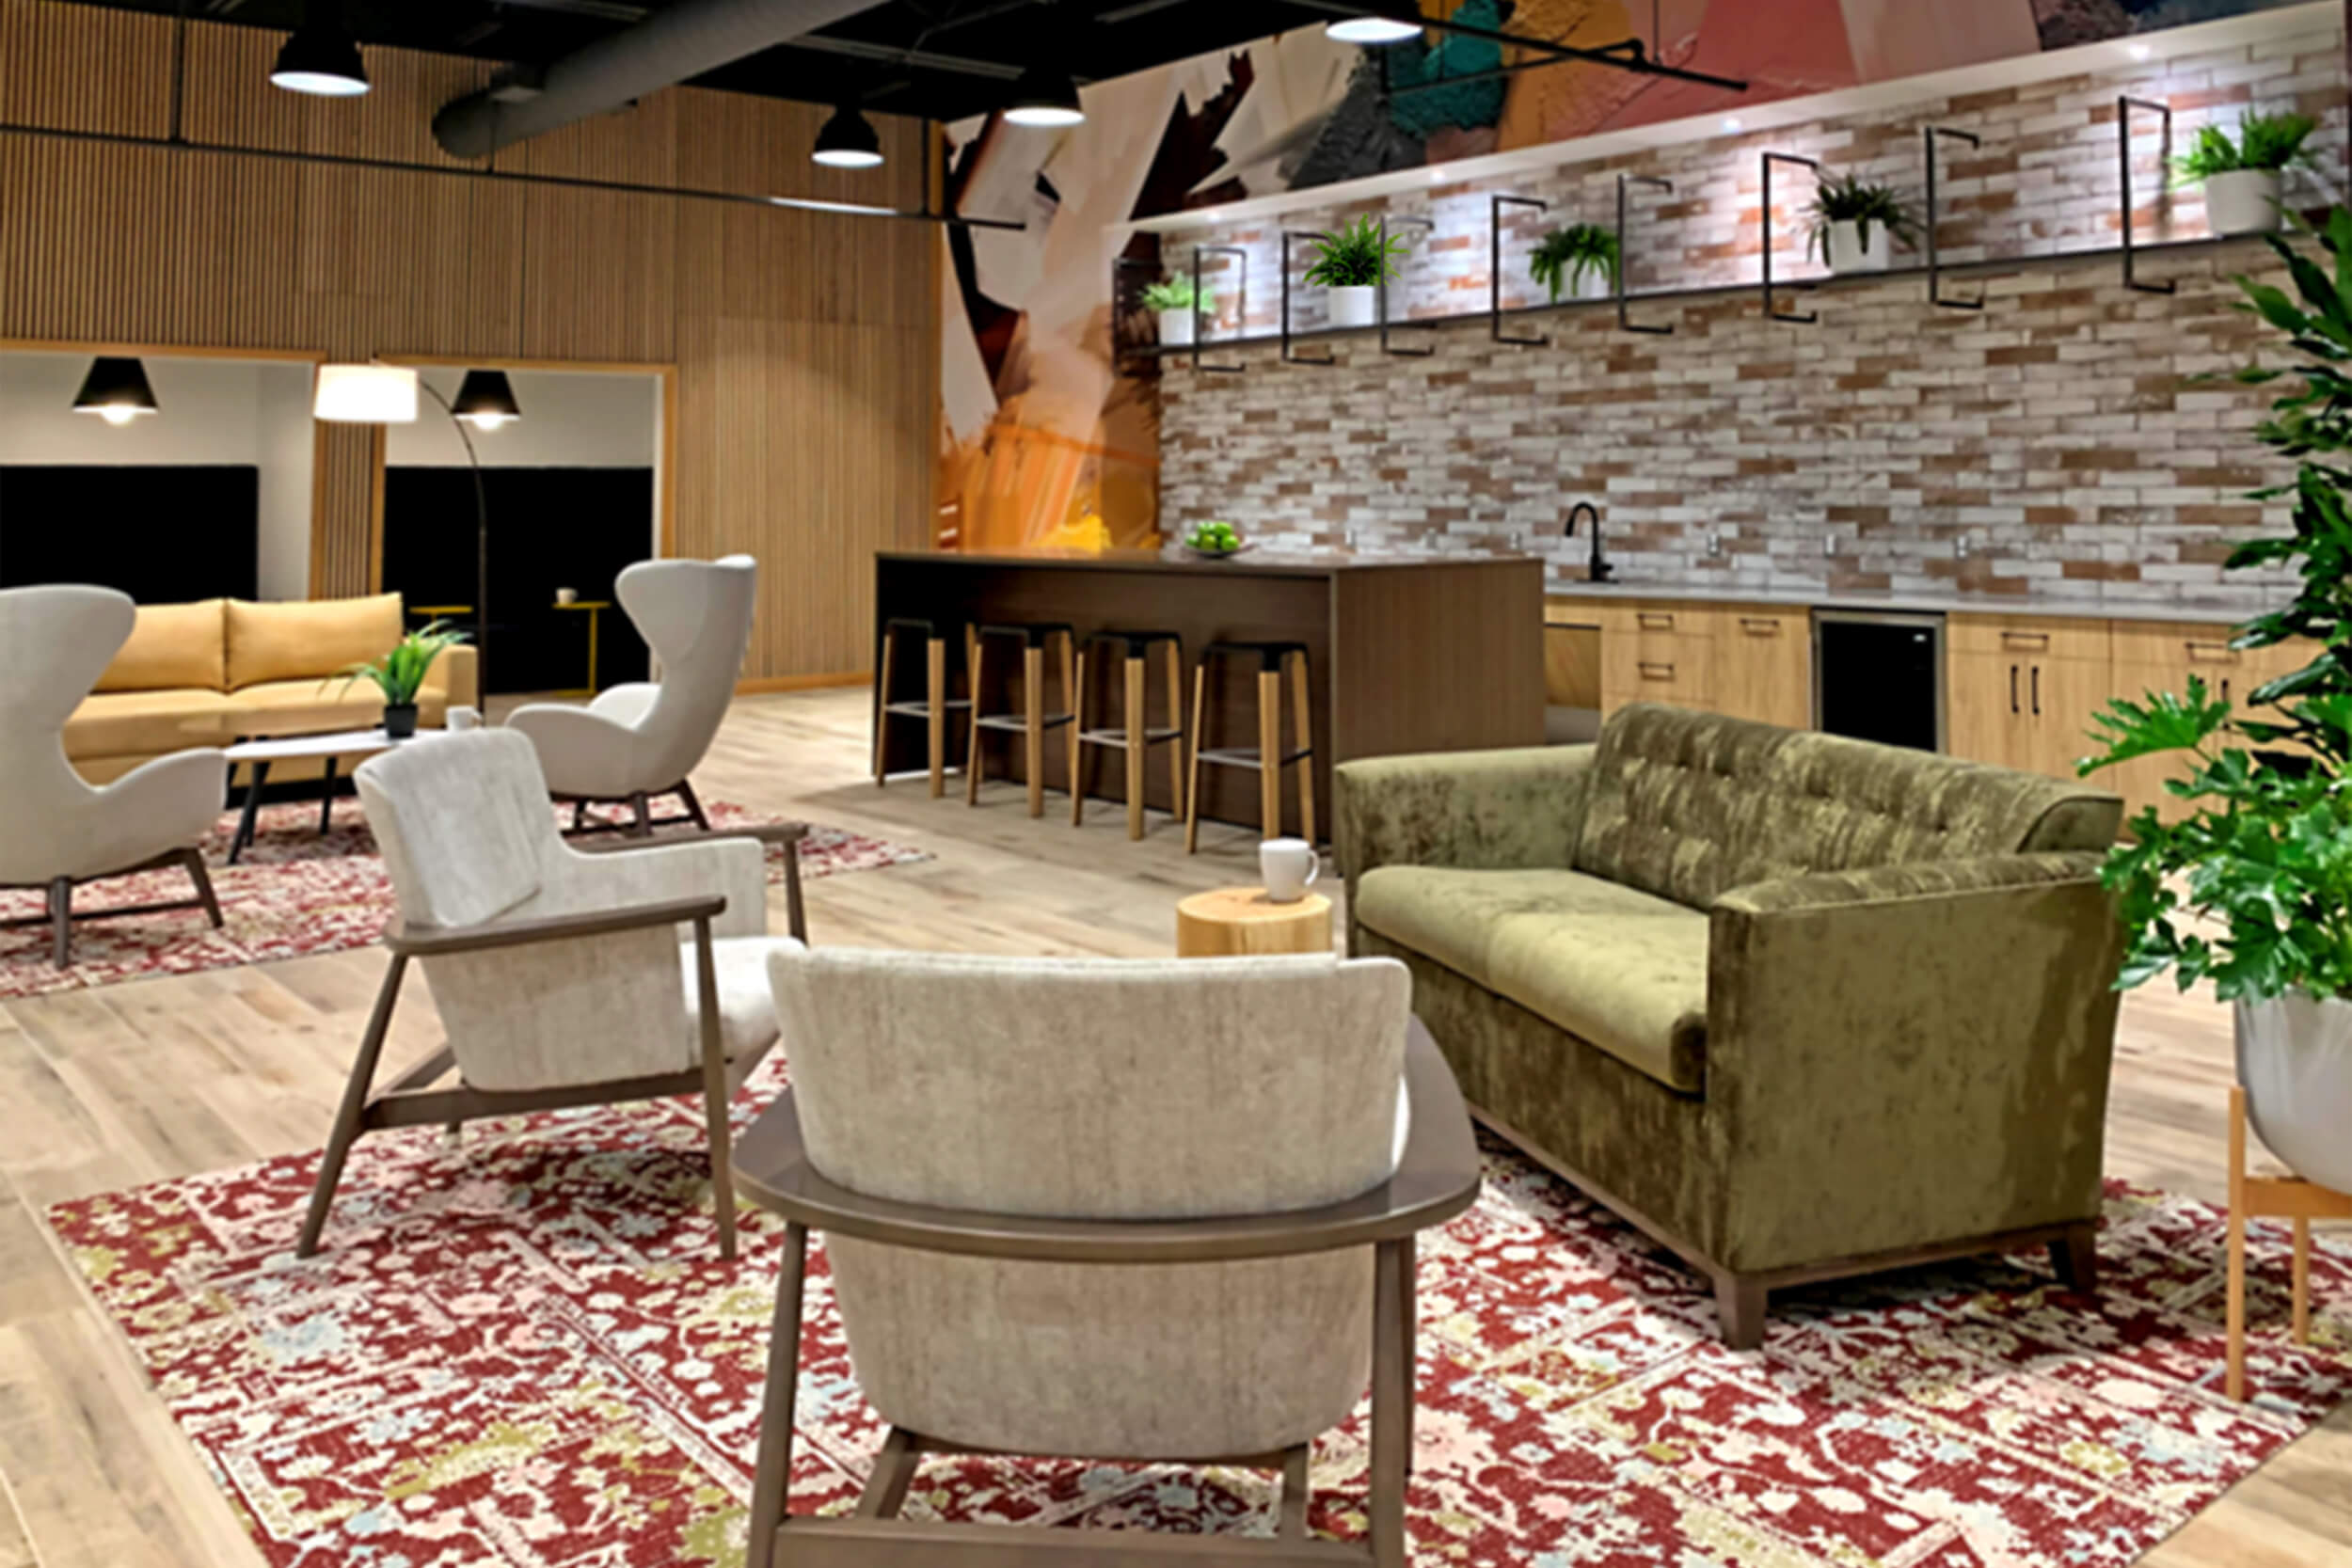 Interior photo of a corporate lounge area. The room features a multicolor carpet, mid-century modern grey and green seats and couch, and a back tiled wall with a wooden work bar area.